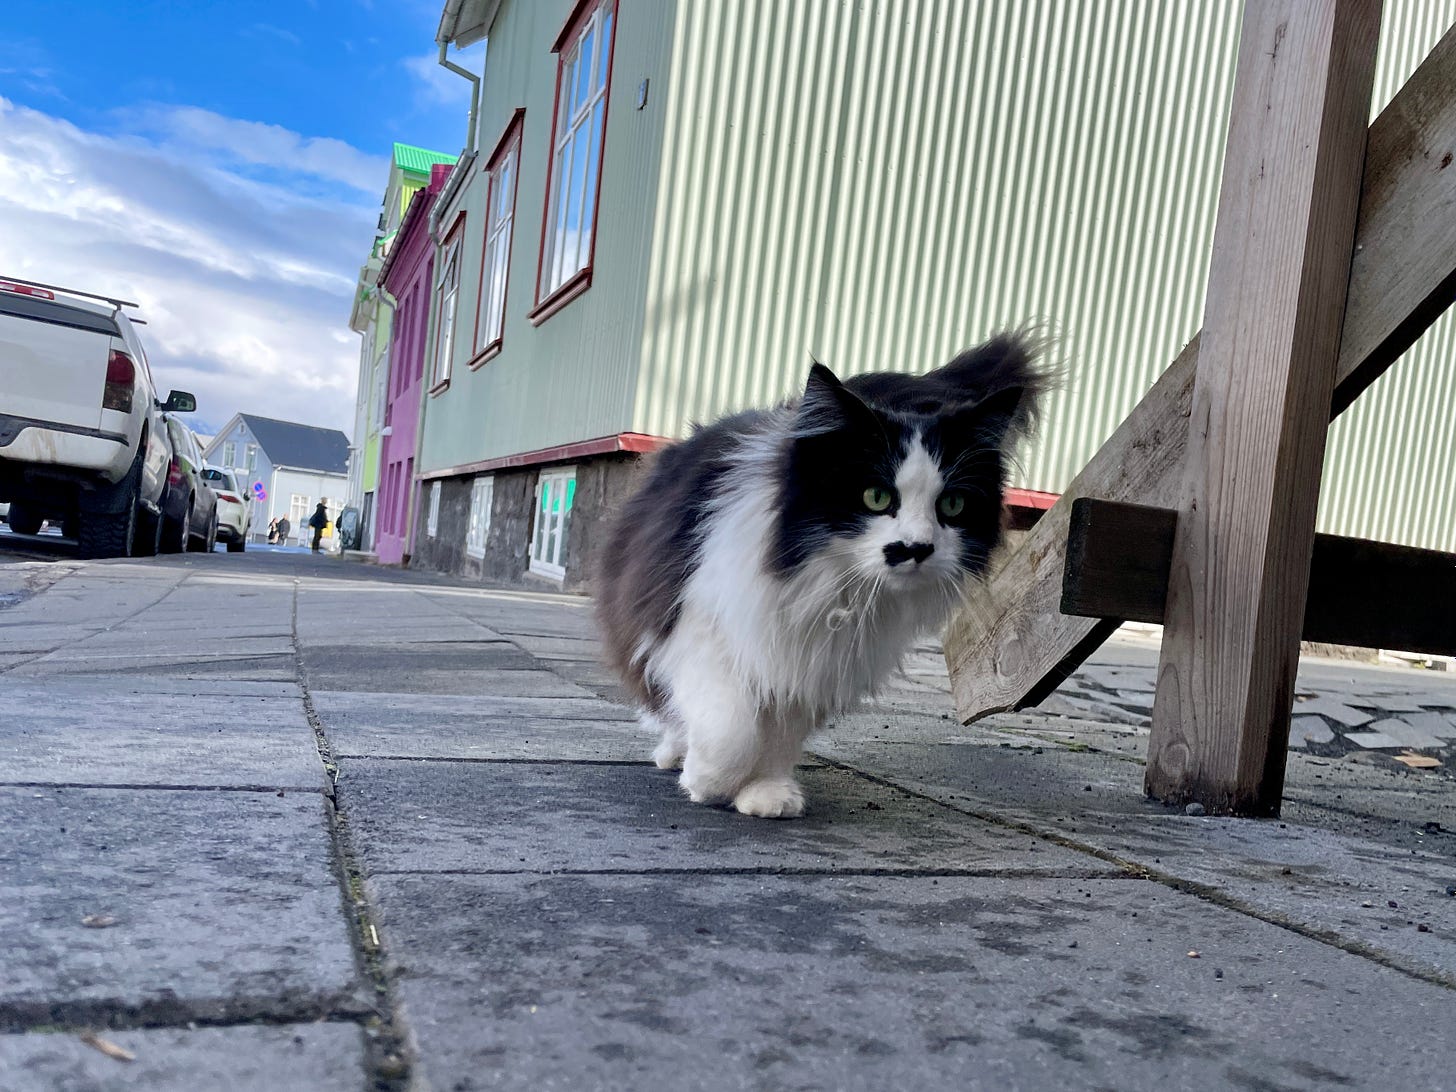 A black and white street cat in Reykjavik.